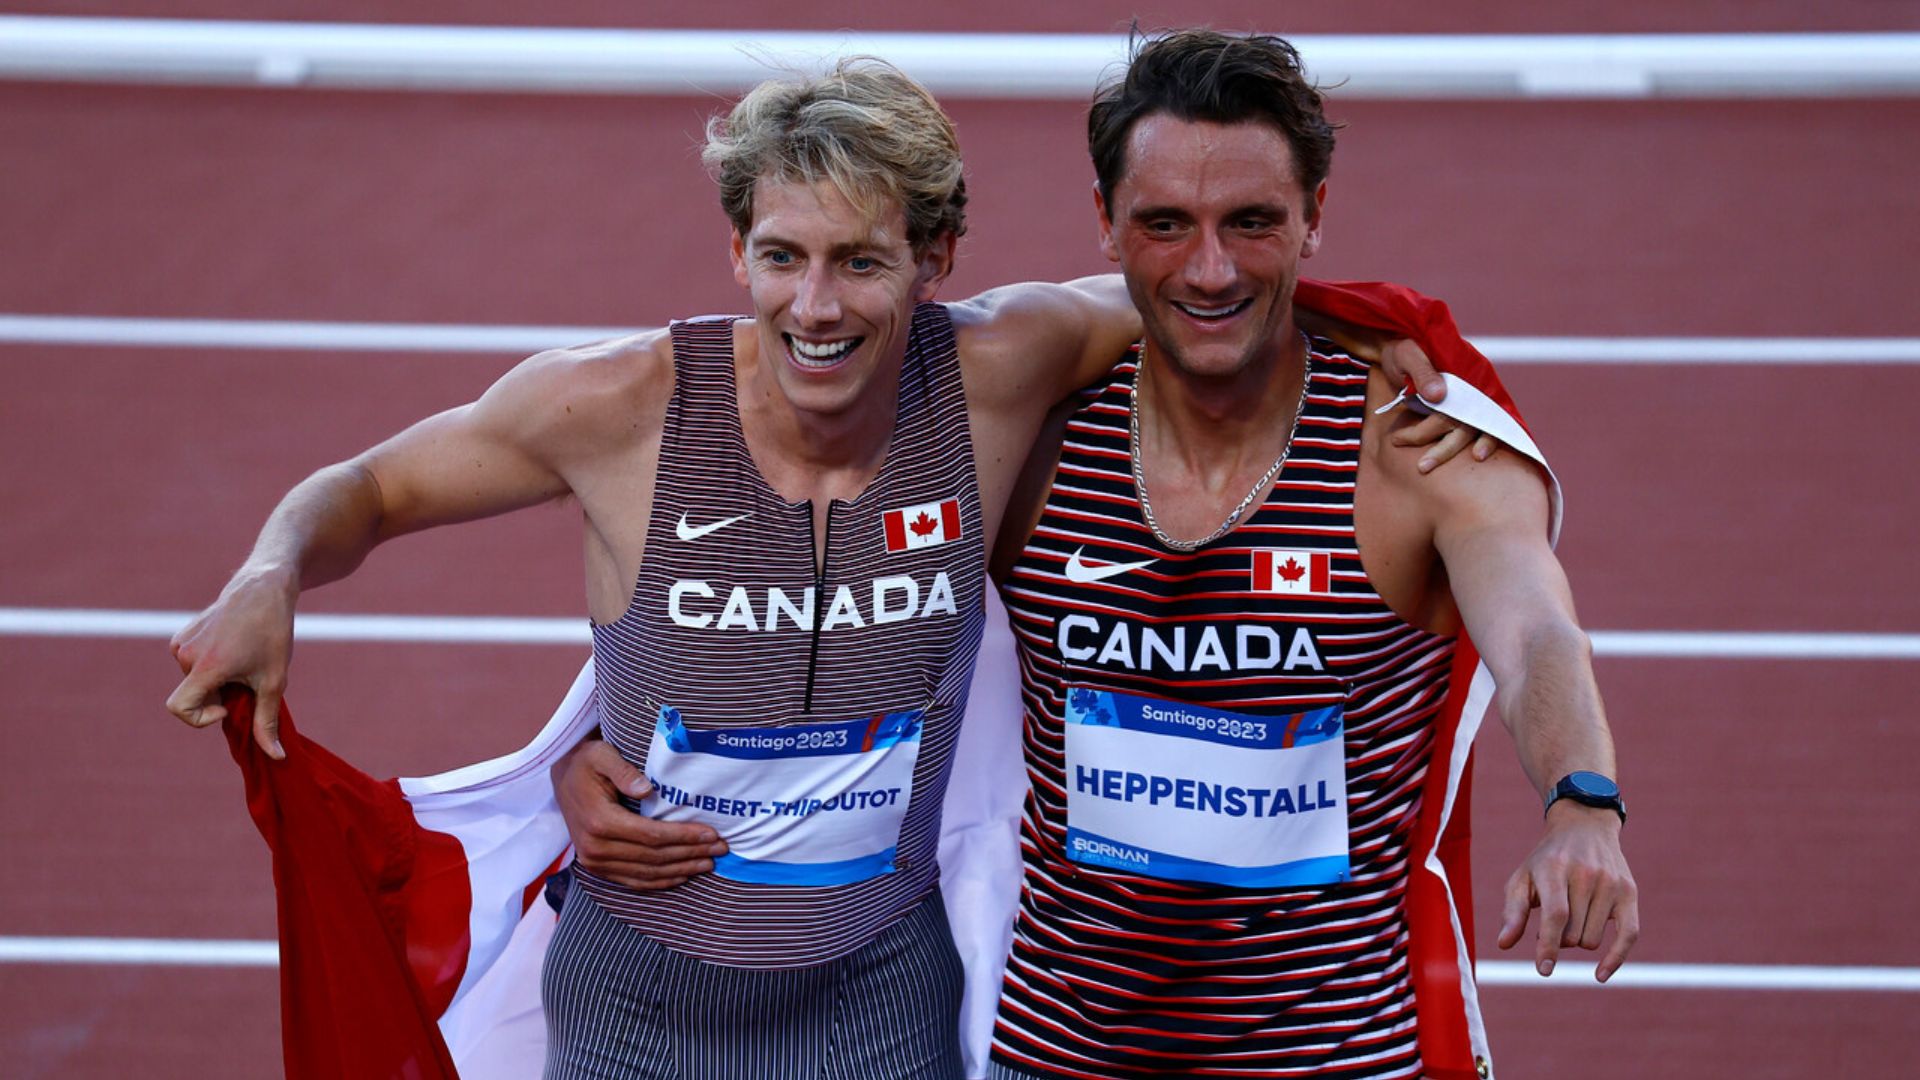 Canada achieves the 'Double' in the Male's 1,500 Meters final